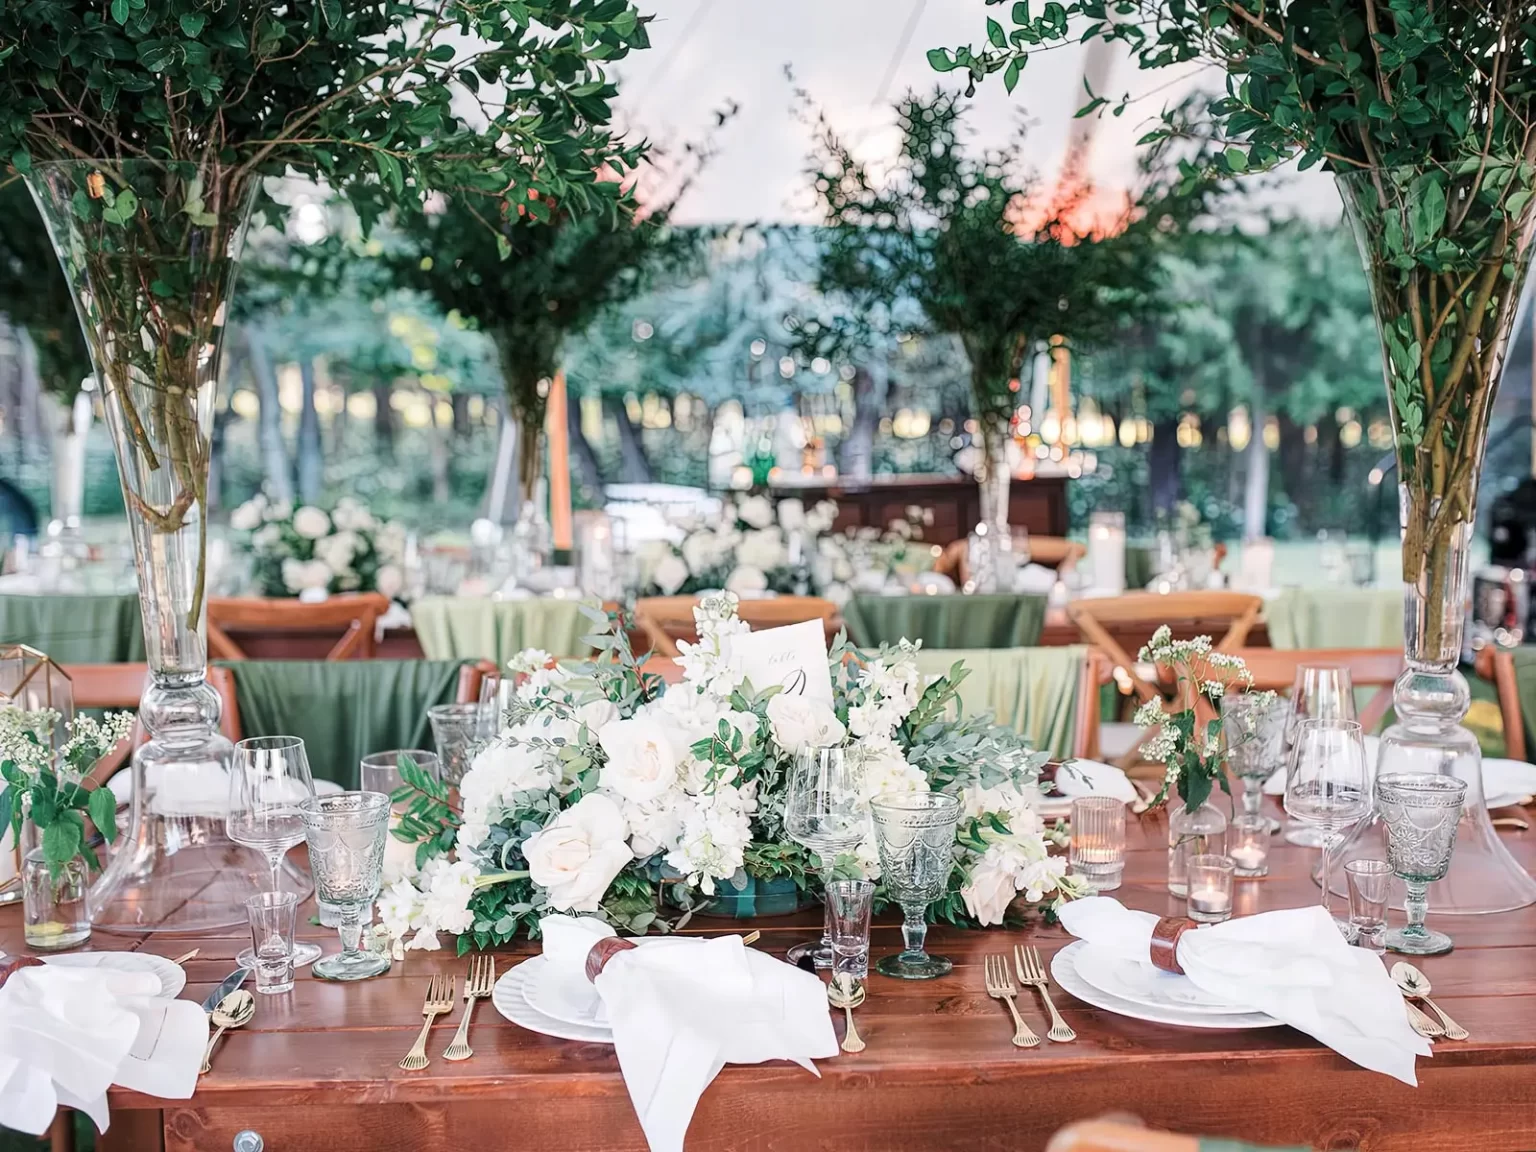 A beautifully set wooden table with white flowers, green foliage centerpieces, and green tablecloths under a tent, ready for an event.